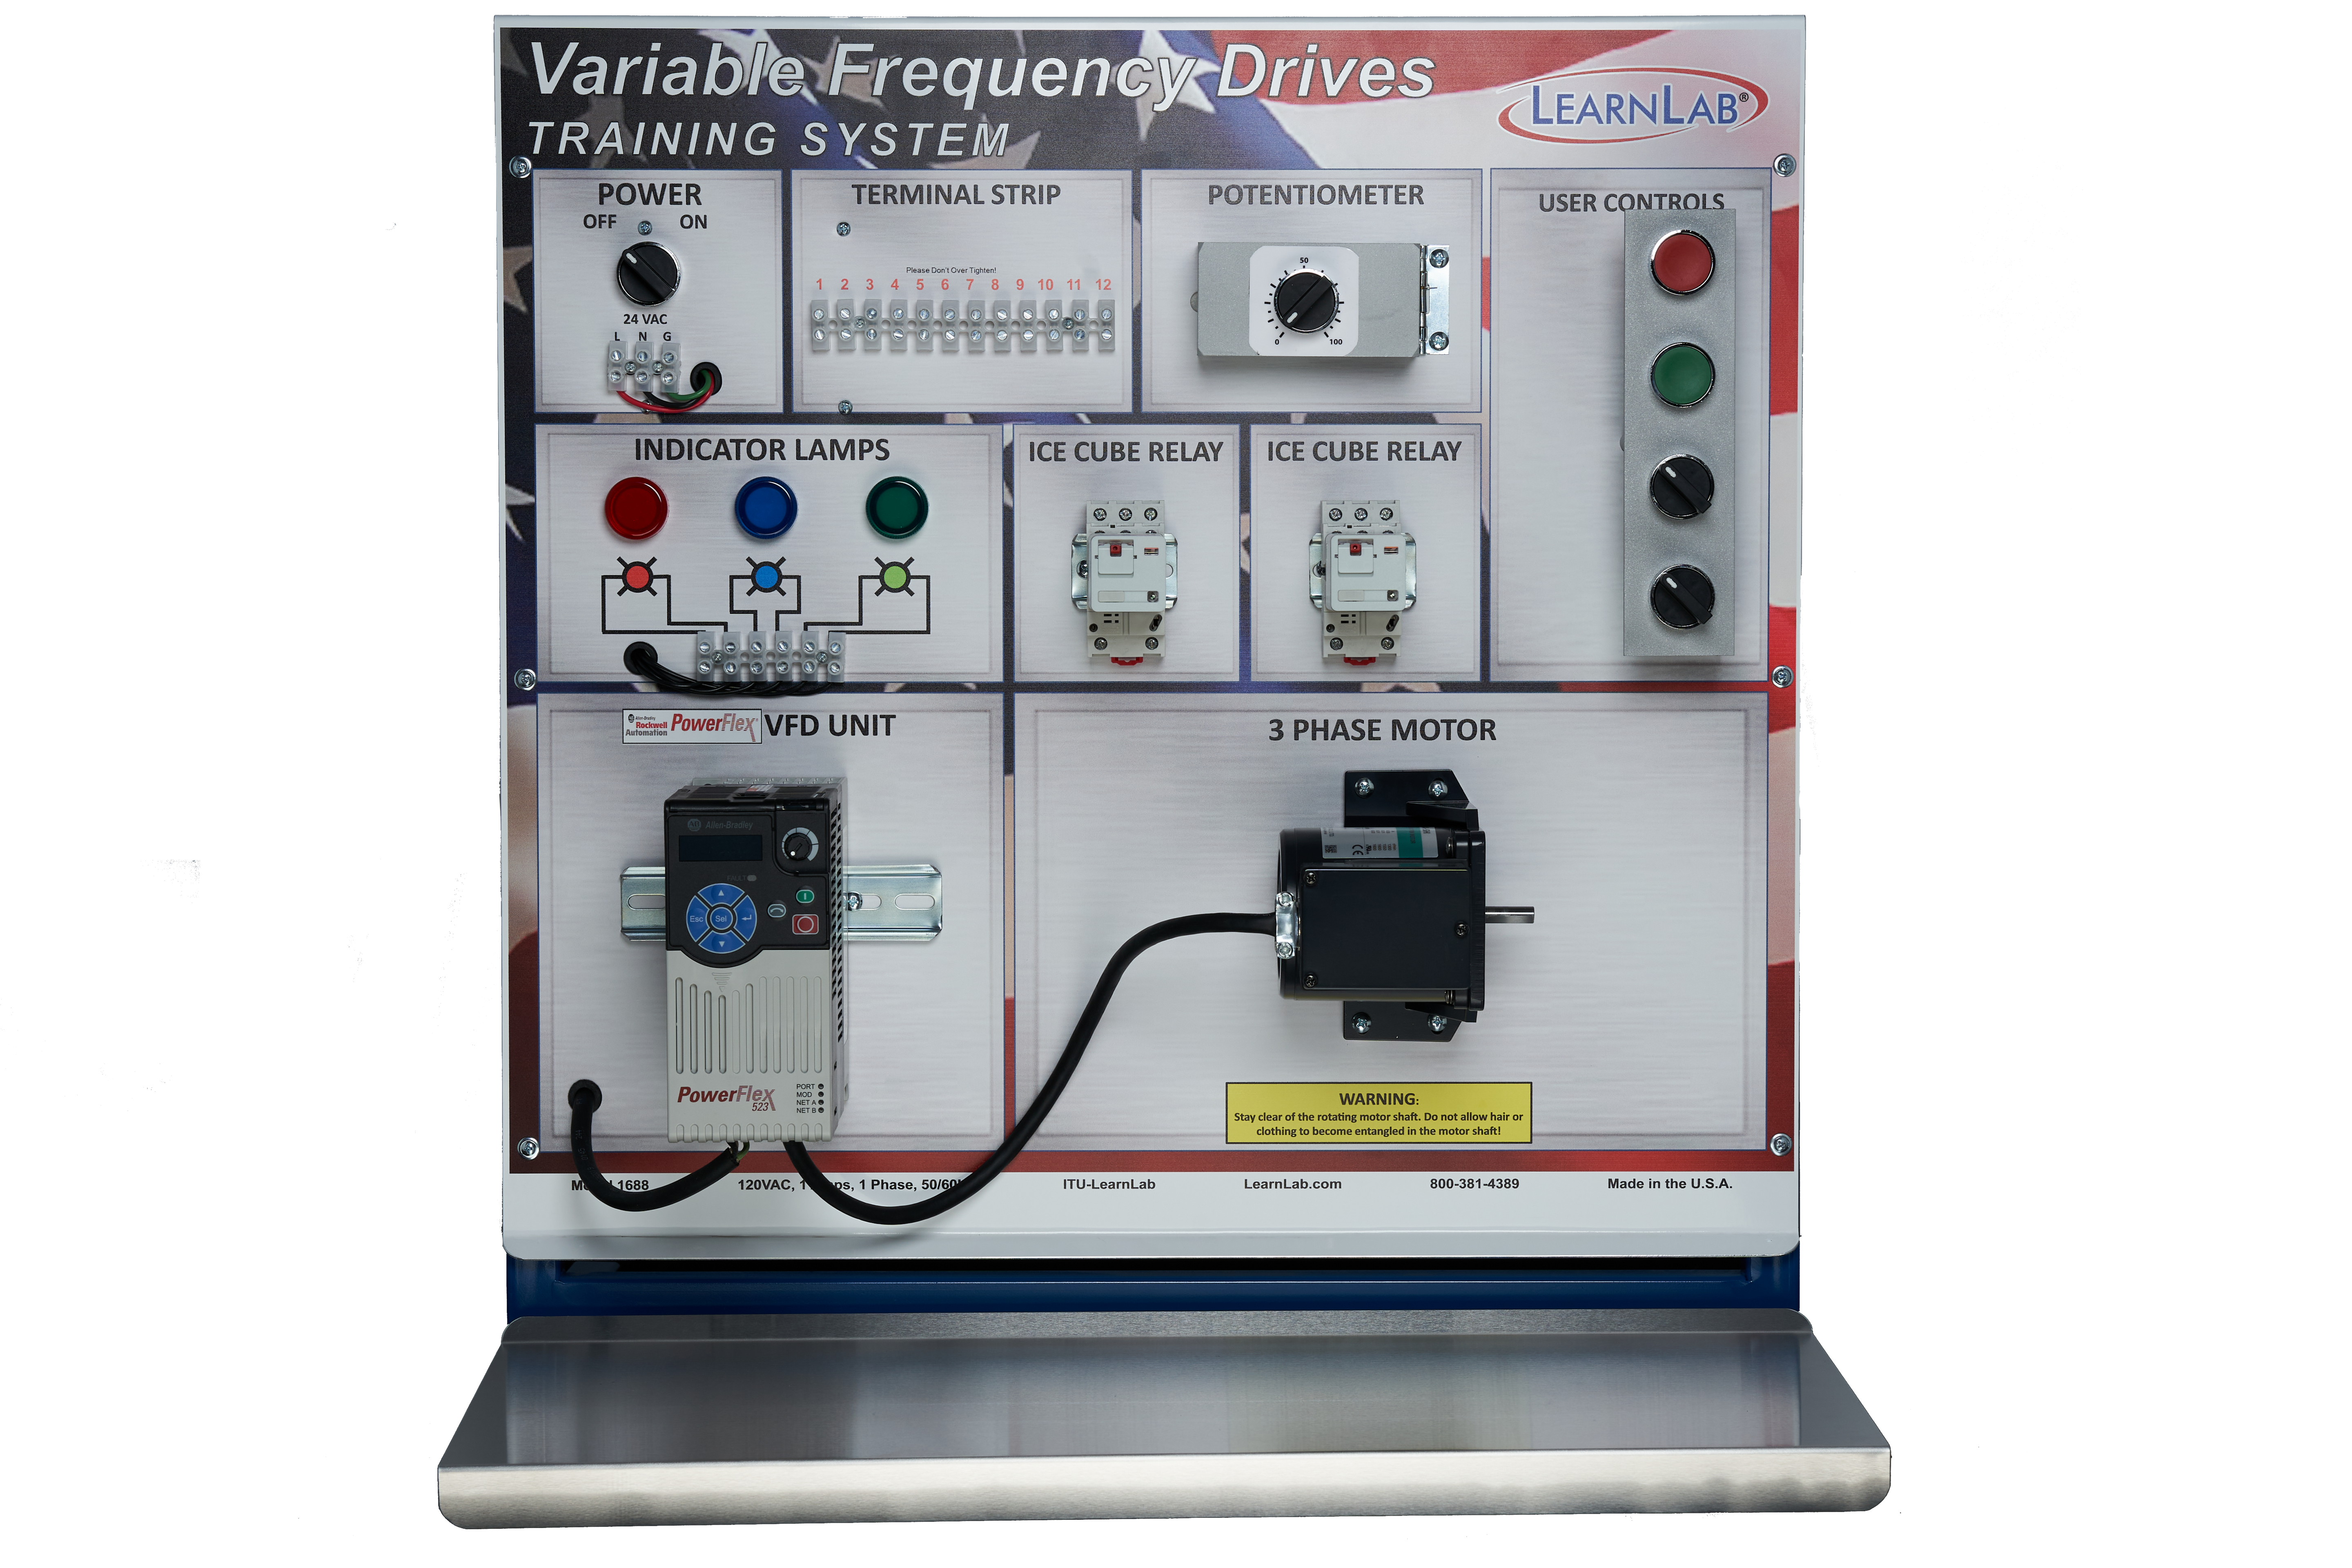 LearnLab's Advanced VFD Variable Frequency Motor Drive Training System